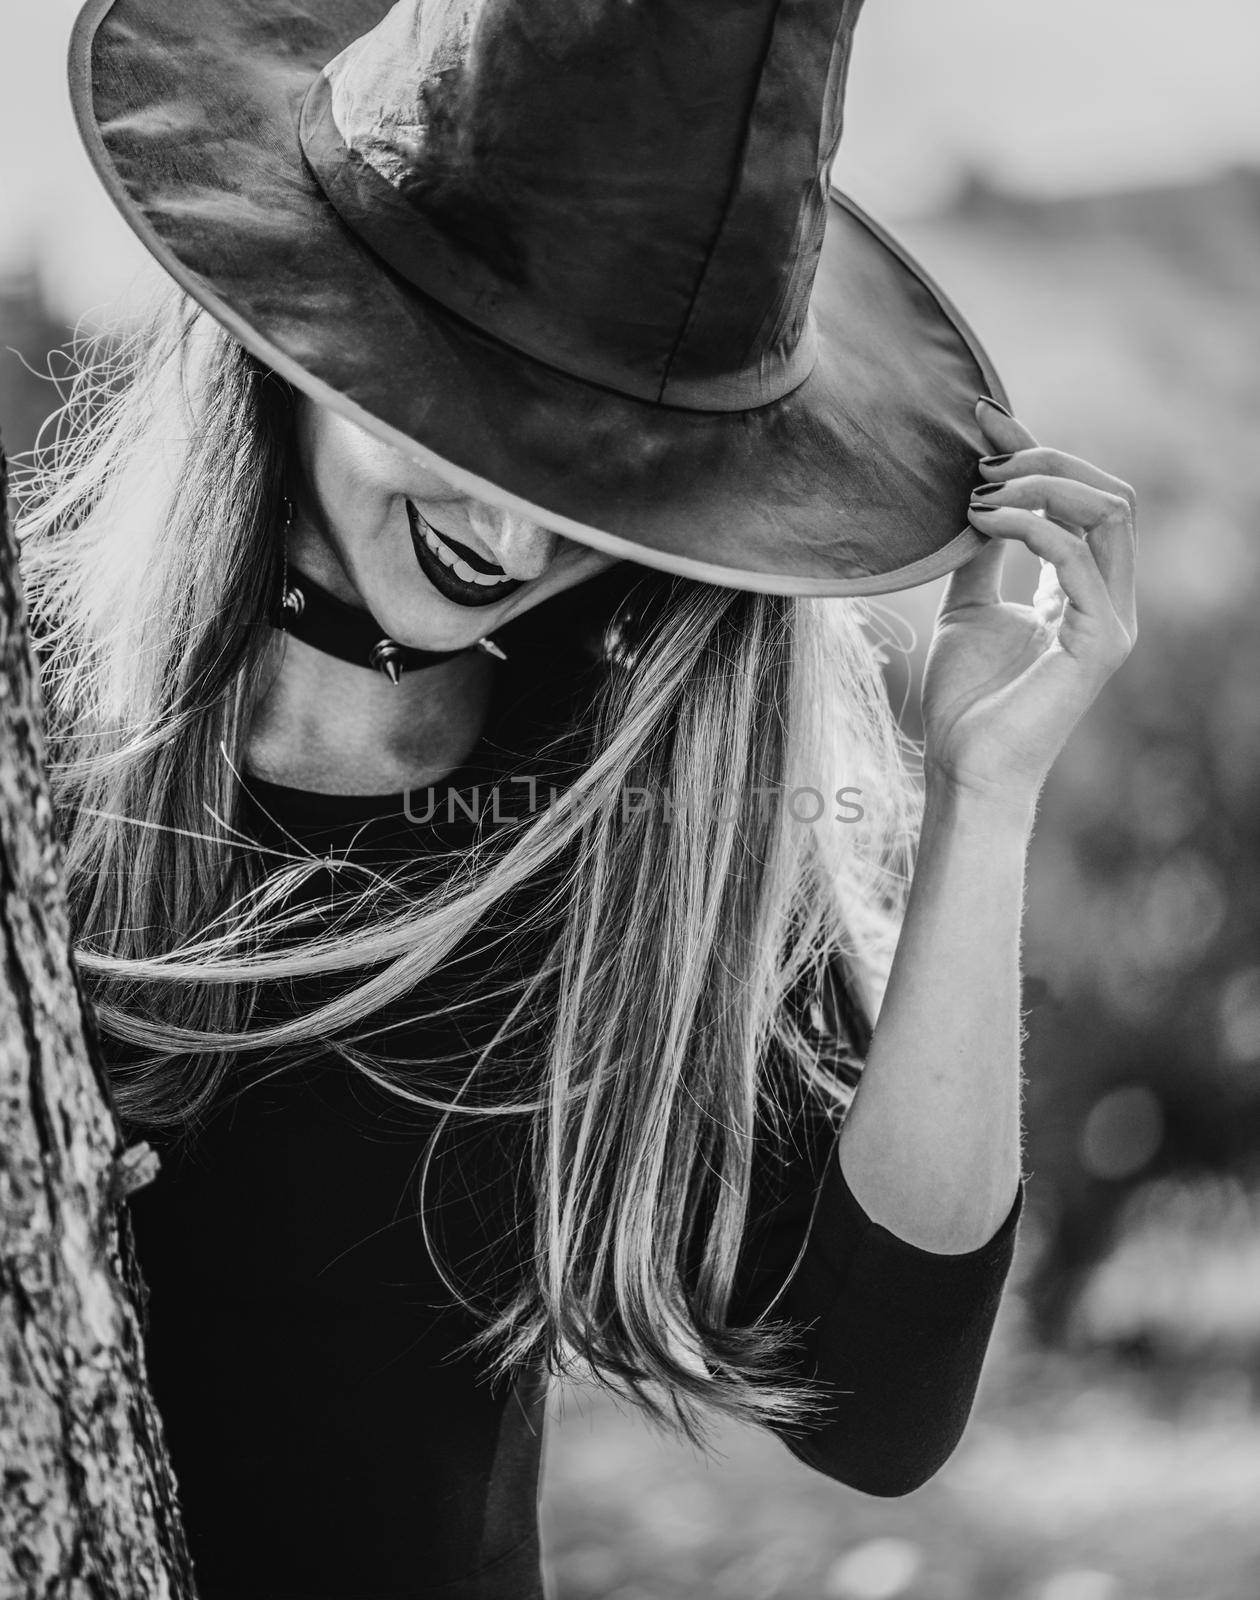 Scary young witch in a hat smiling outdoor. Theme of Halloween. Monochrome image